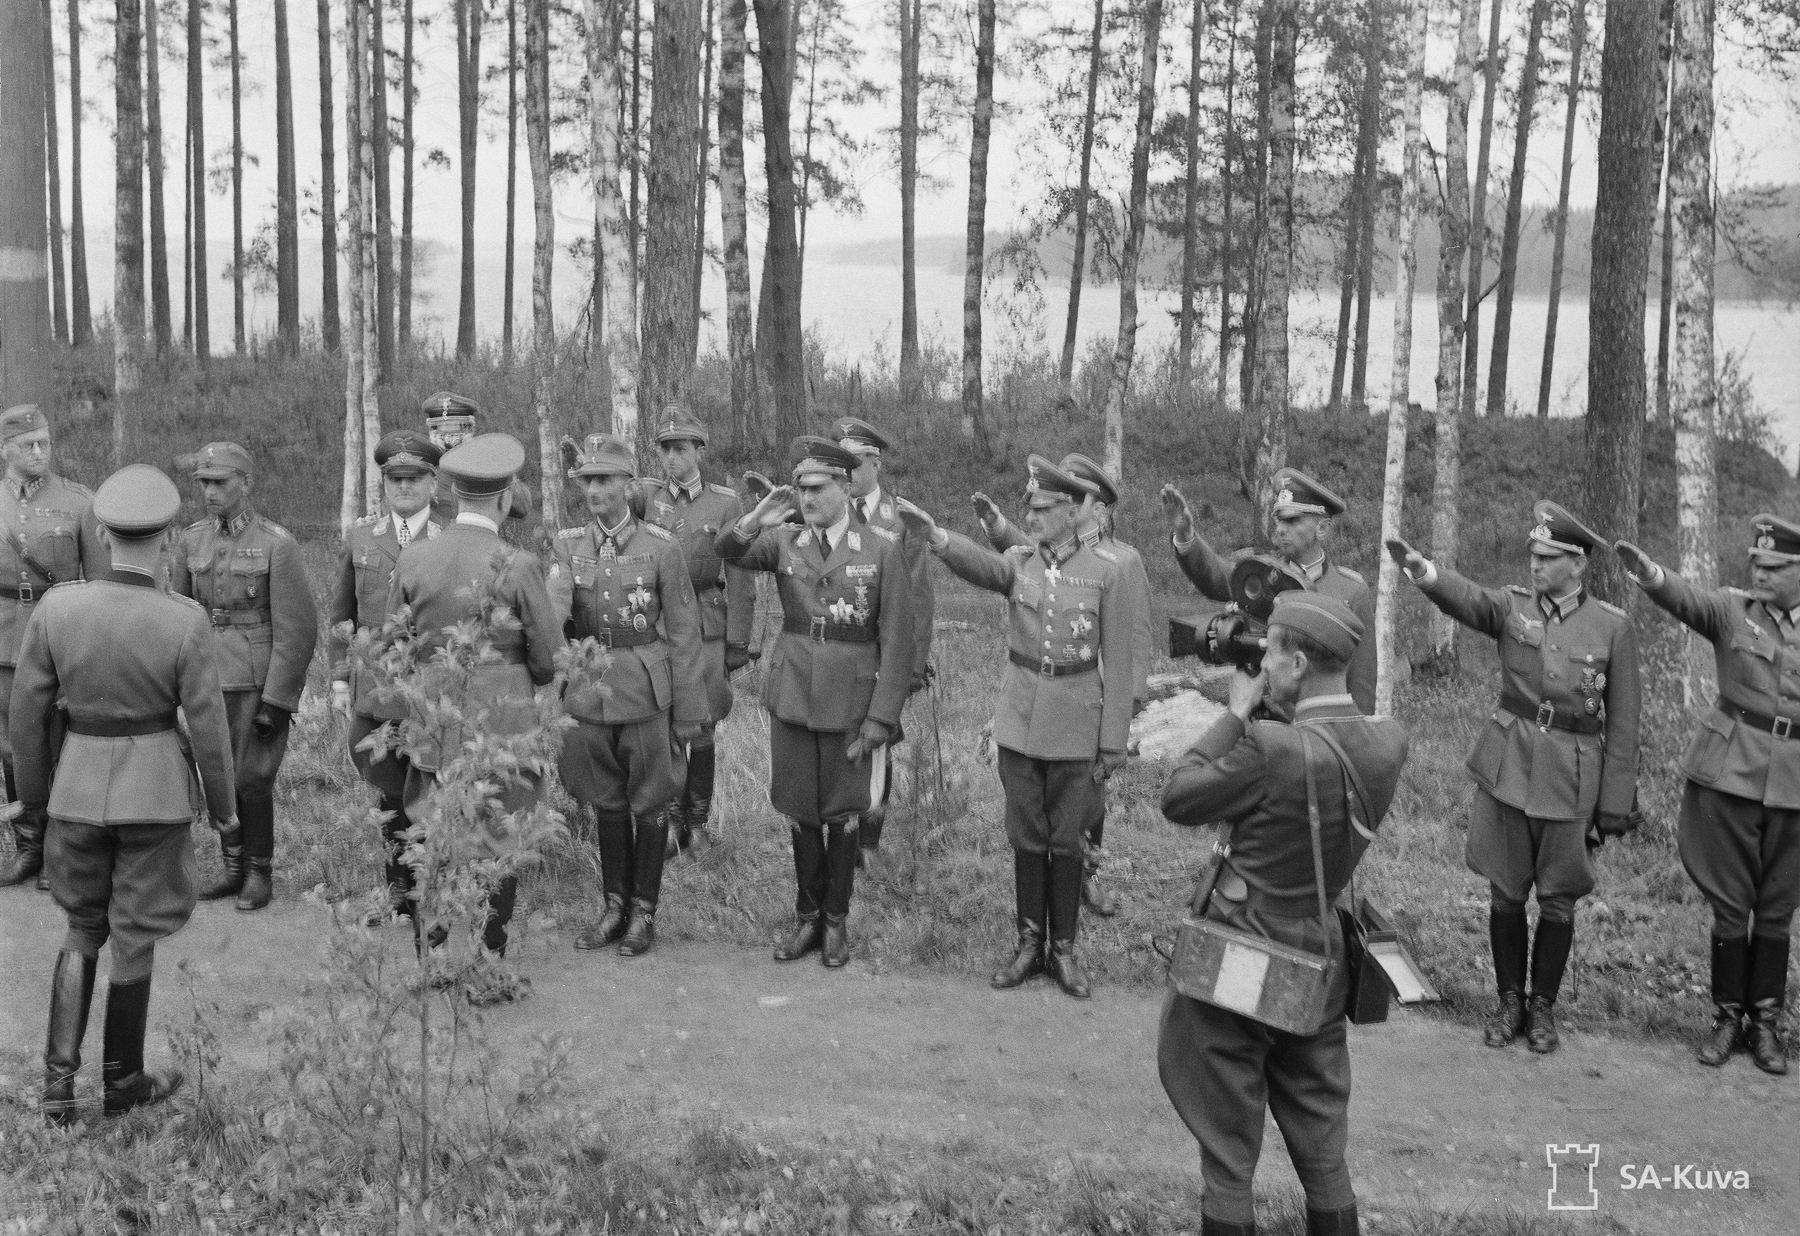 Hitler greets officers during his visit in Finland